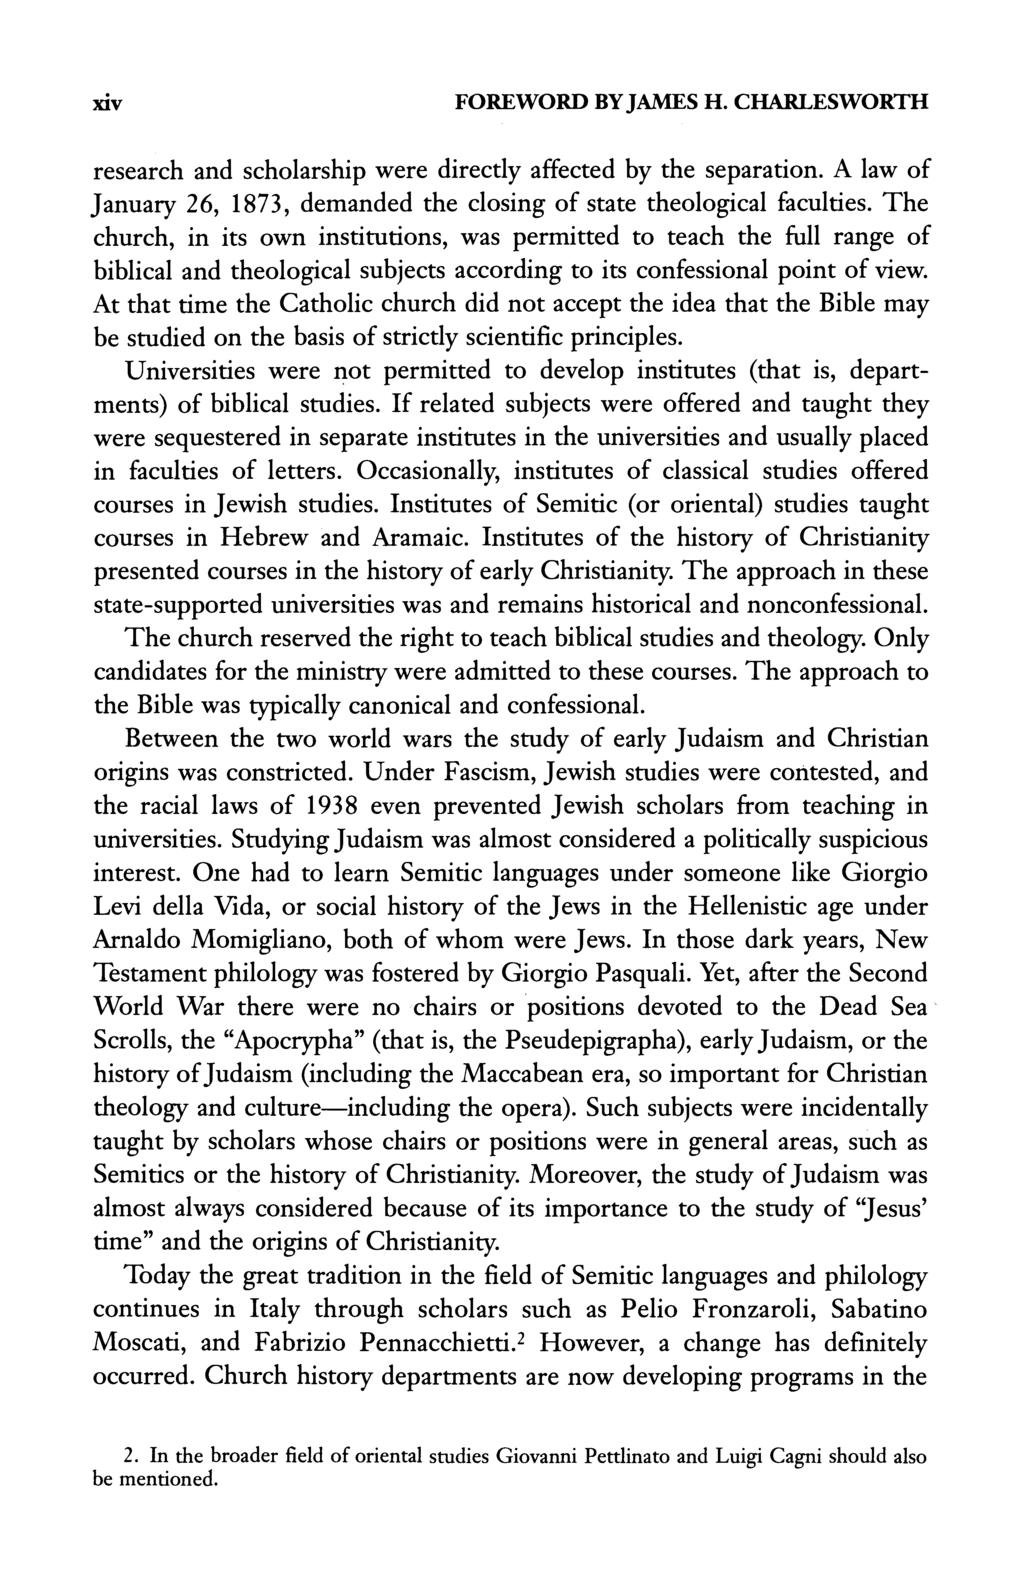 xiv FOREWORD BY JAMES H. CHARLESWORTH research and scholarship were directly affected by the separation. A law of January 26, 1873, demanded the closing of state theological faculties.